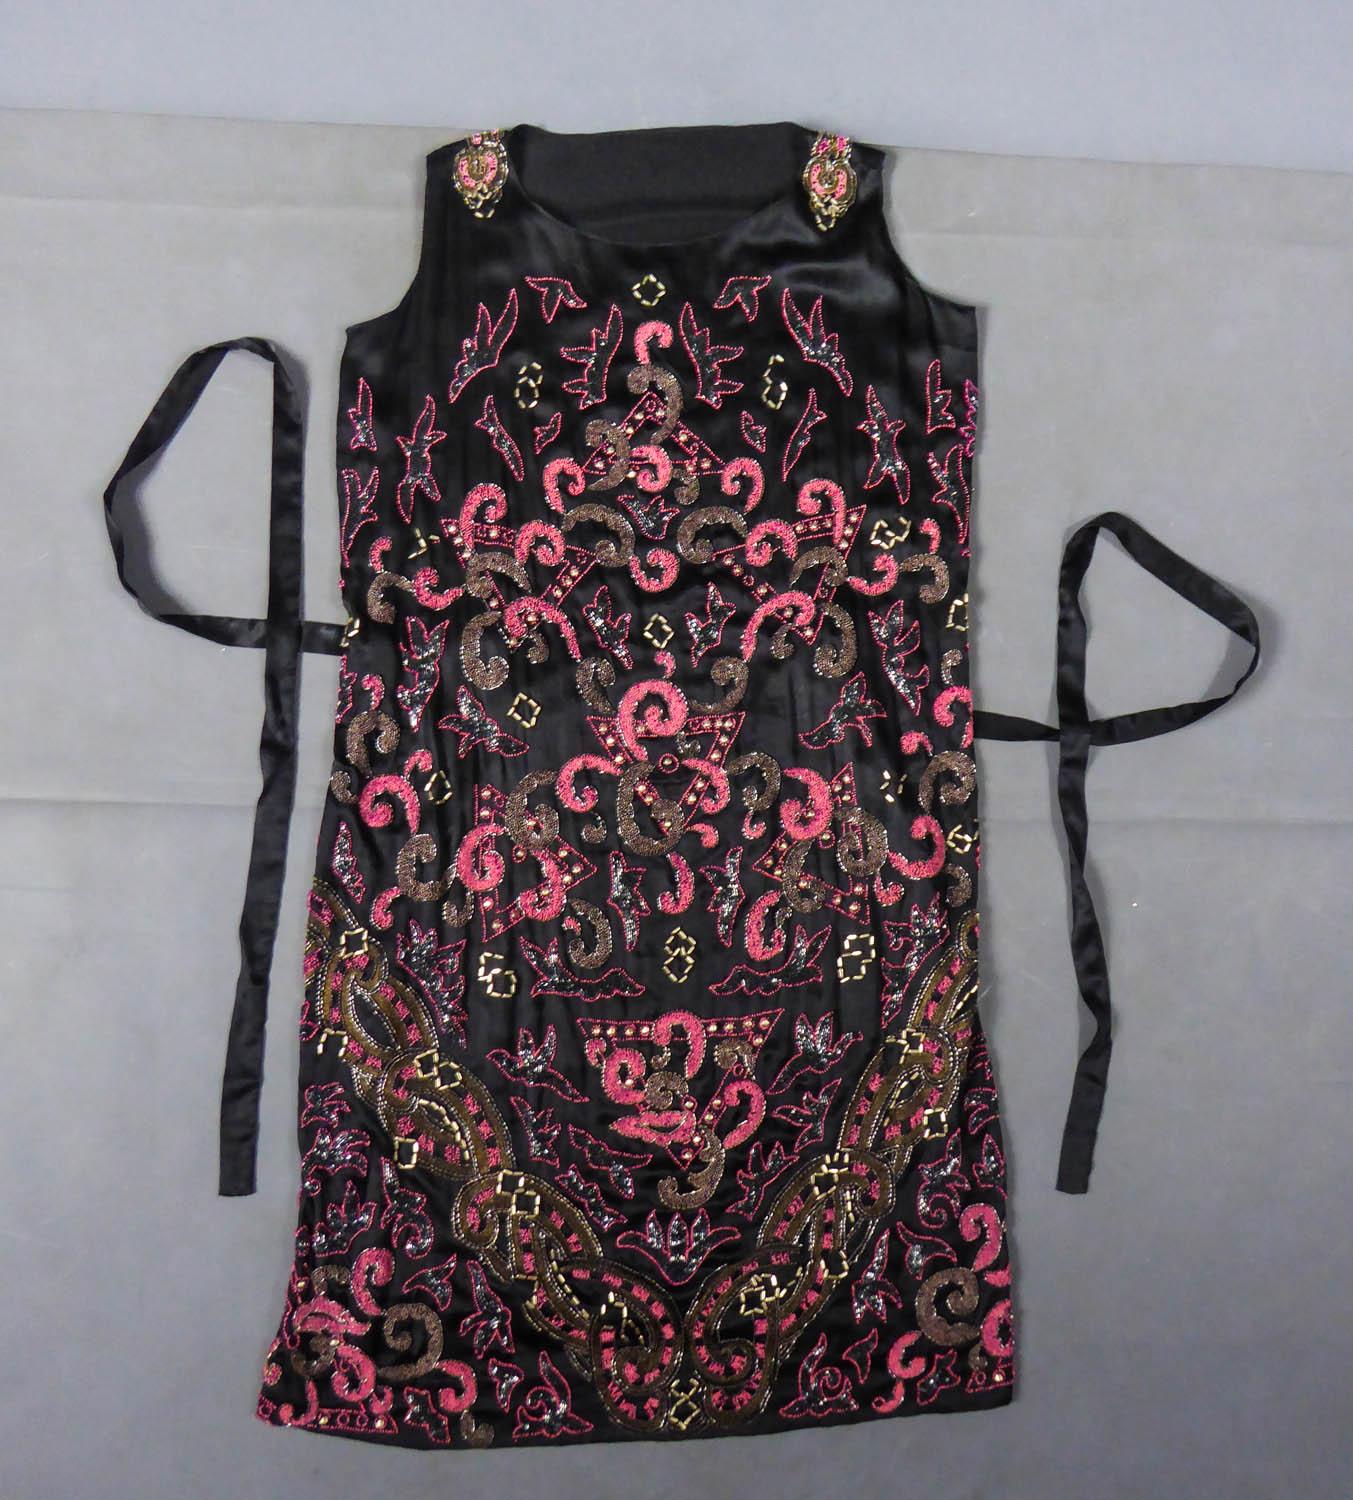 Circa 1925
France

Charleston evening dress from the Art Deco period in black duchess satin embroidered with silver cabochons, pink and black glass beads and iridescent tubular beads. Straight sleeveless dress with baroque decor in the Bizarre taste